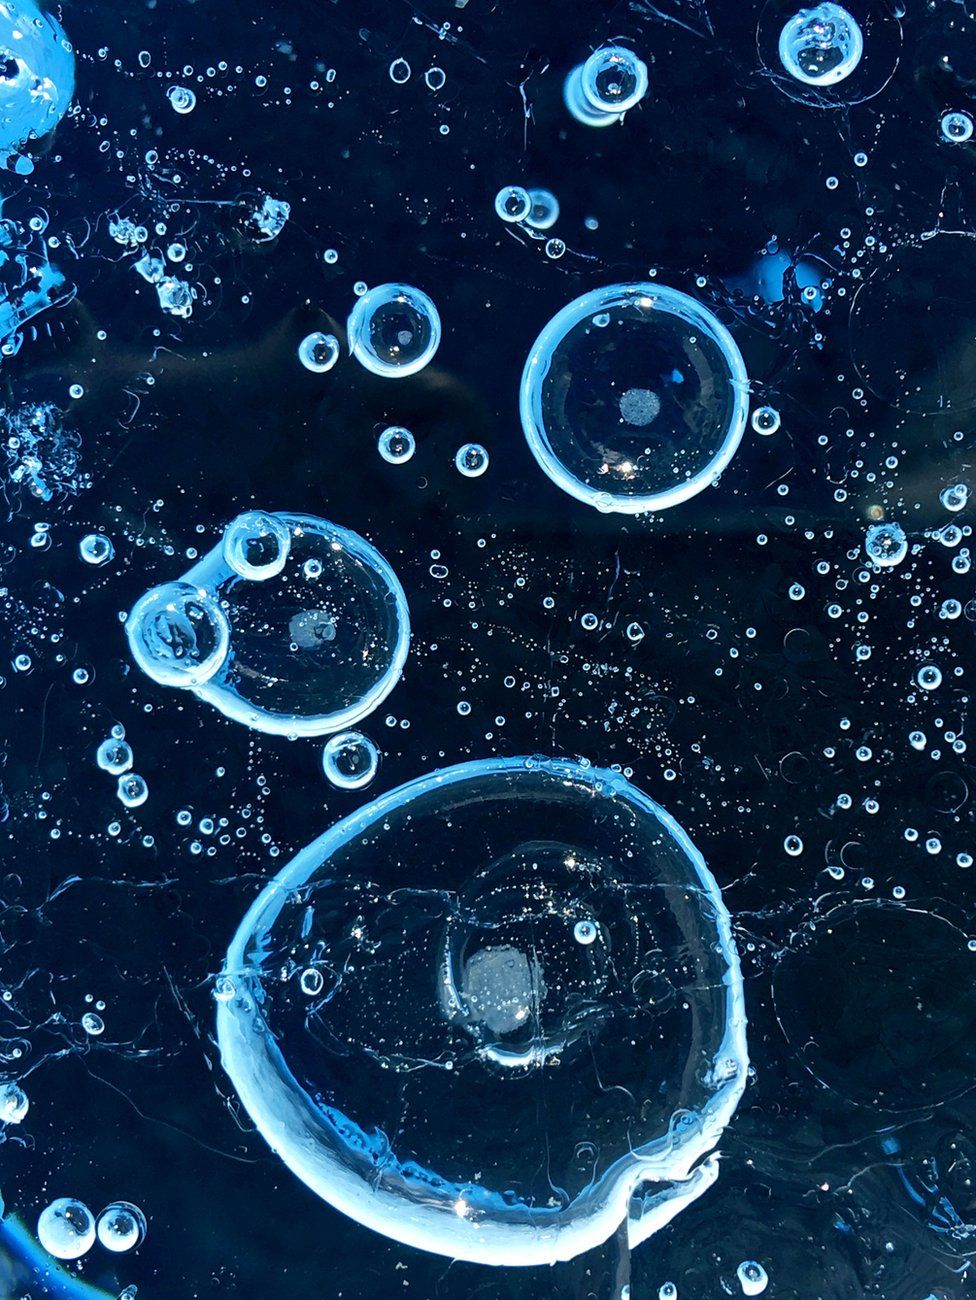 Air bubbles trapped in ice seen in a glacier